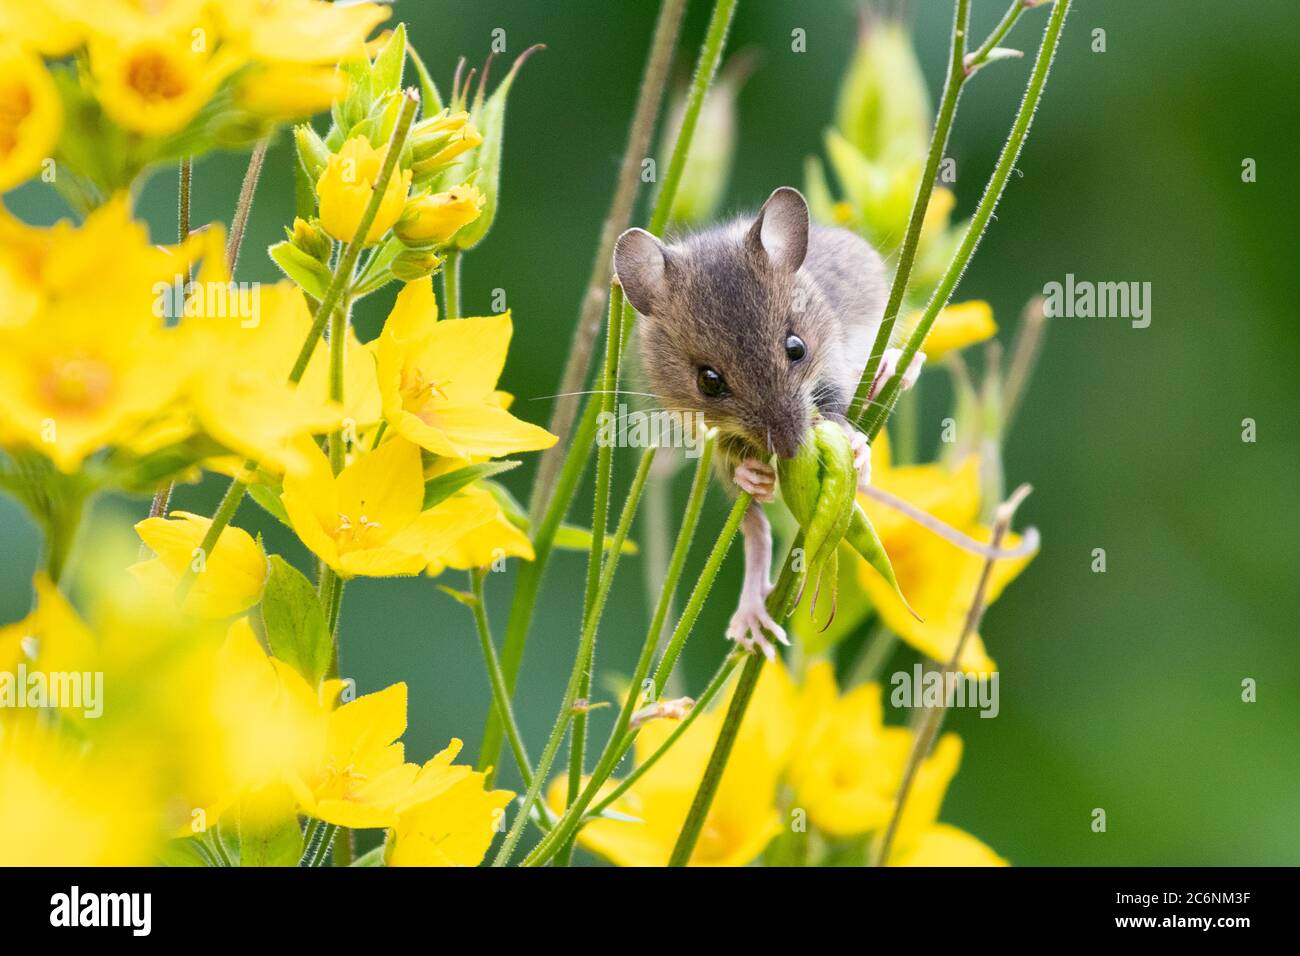 Killearn, Stirlingshire, Scotland, UK. 11th July, 2020. UK weather - a tiny wood mouse biting off the seedhead of an aquilegia plant on a cloudy day with sunny intervals in a Stirlingshire wildlife garden Credit: Kay Roxby/Alamy Live News Stock Photo